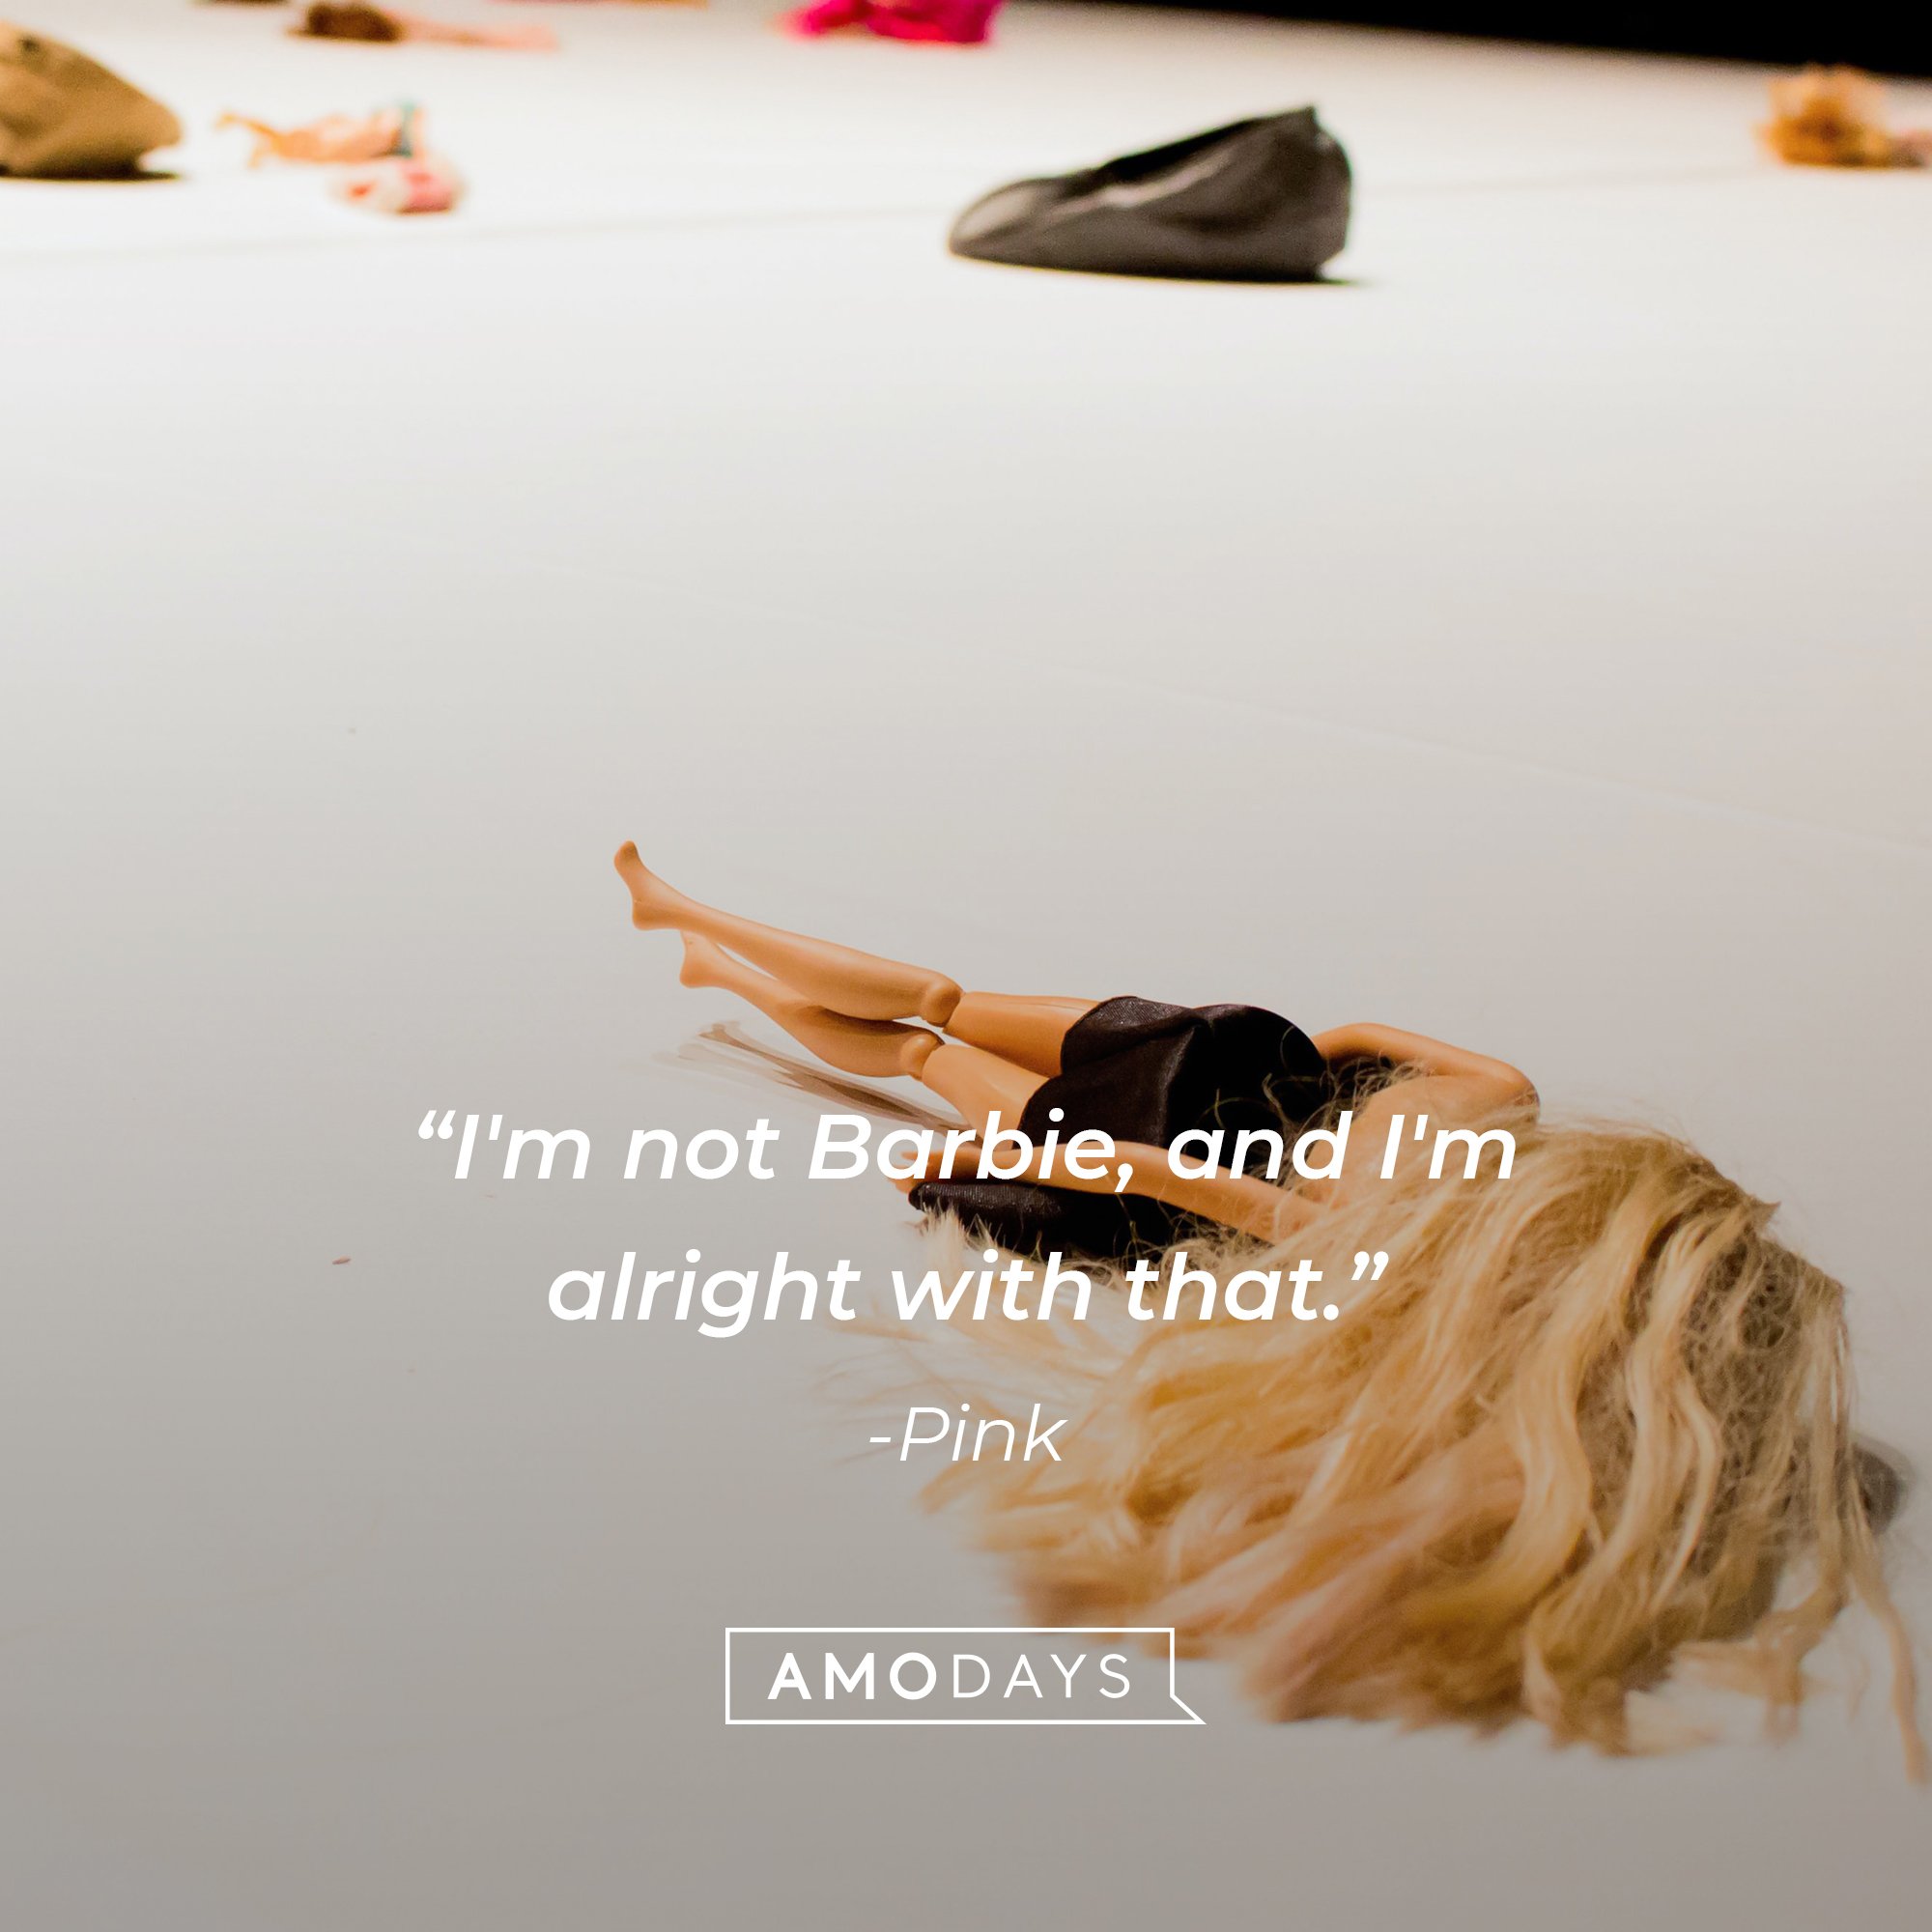 Pink's quote: "I'm not Barbie, and I'm alright with that." | Image: AmoDays